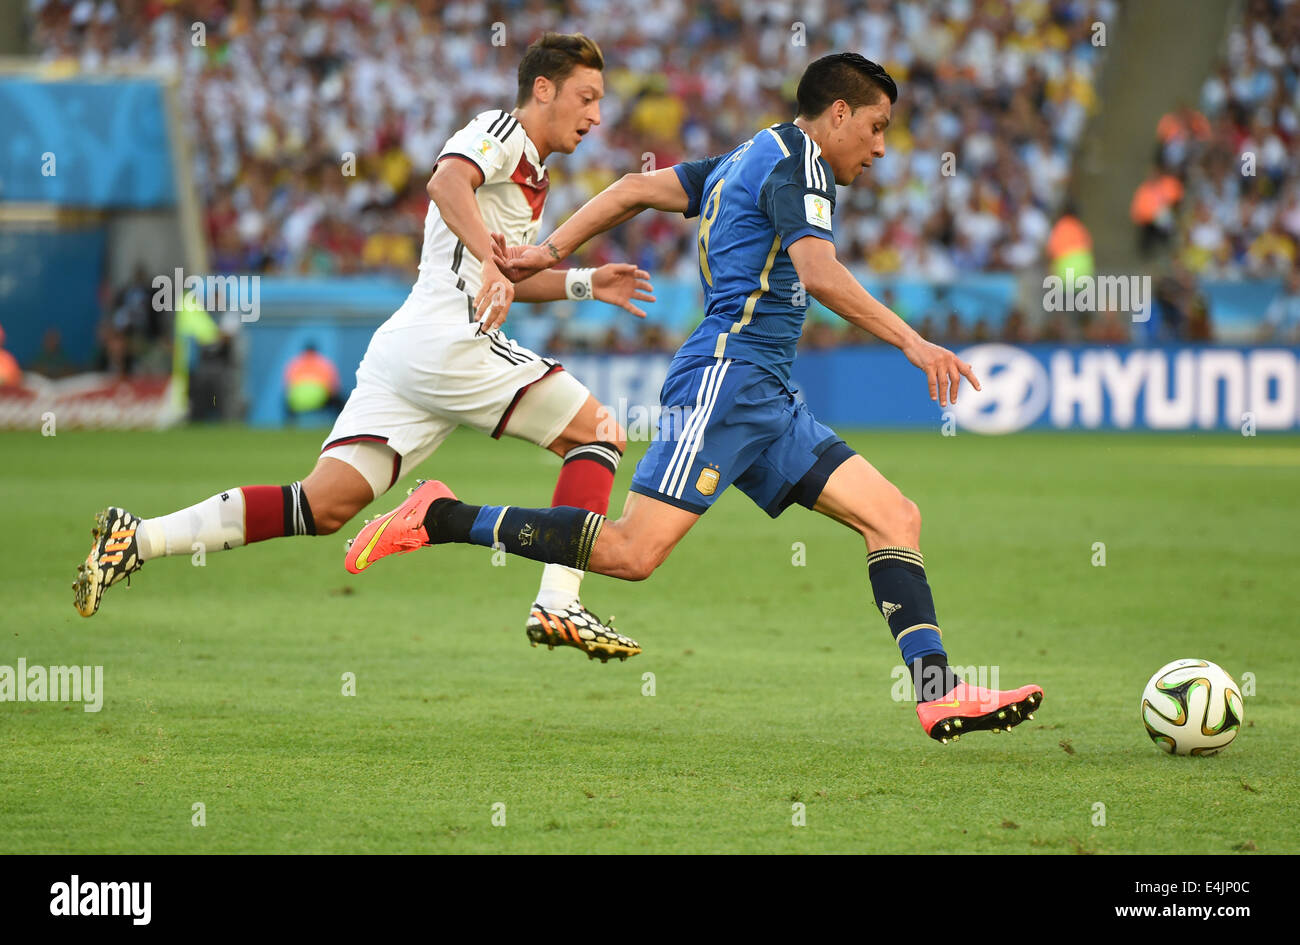 Rio de Janeiro, Brazil. 13th July, 2014. Mesut Oezil of Germany and Enzo Perez of Argenina vie for the ball during the FIFA World Cup 2014 final soccer match between Germany and Argentina at the Estadio do Maracana in Rio de Janeiro, Brazil, 13 July 2014. Photo: Marcus Brandt/dpa/Alamy Live News Stock Photo